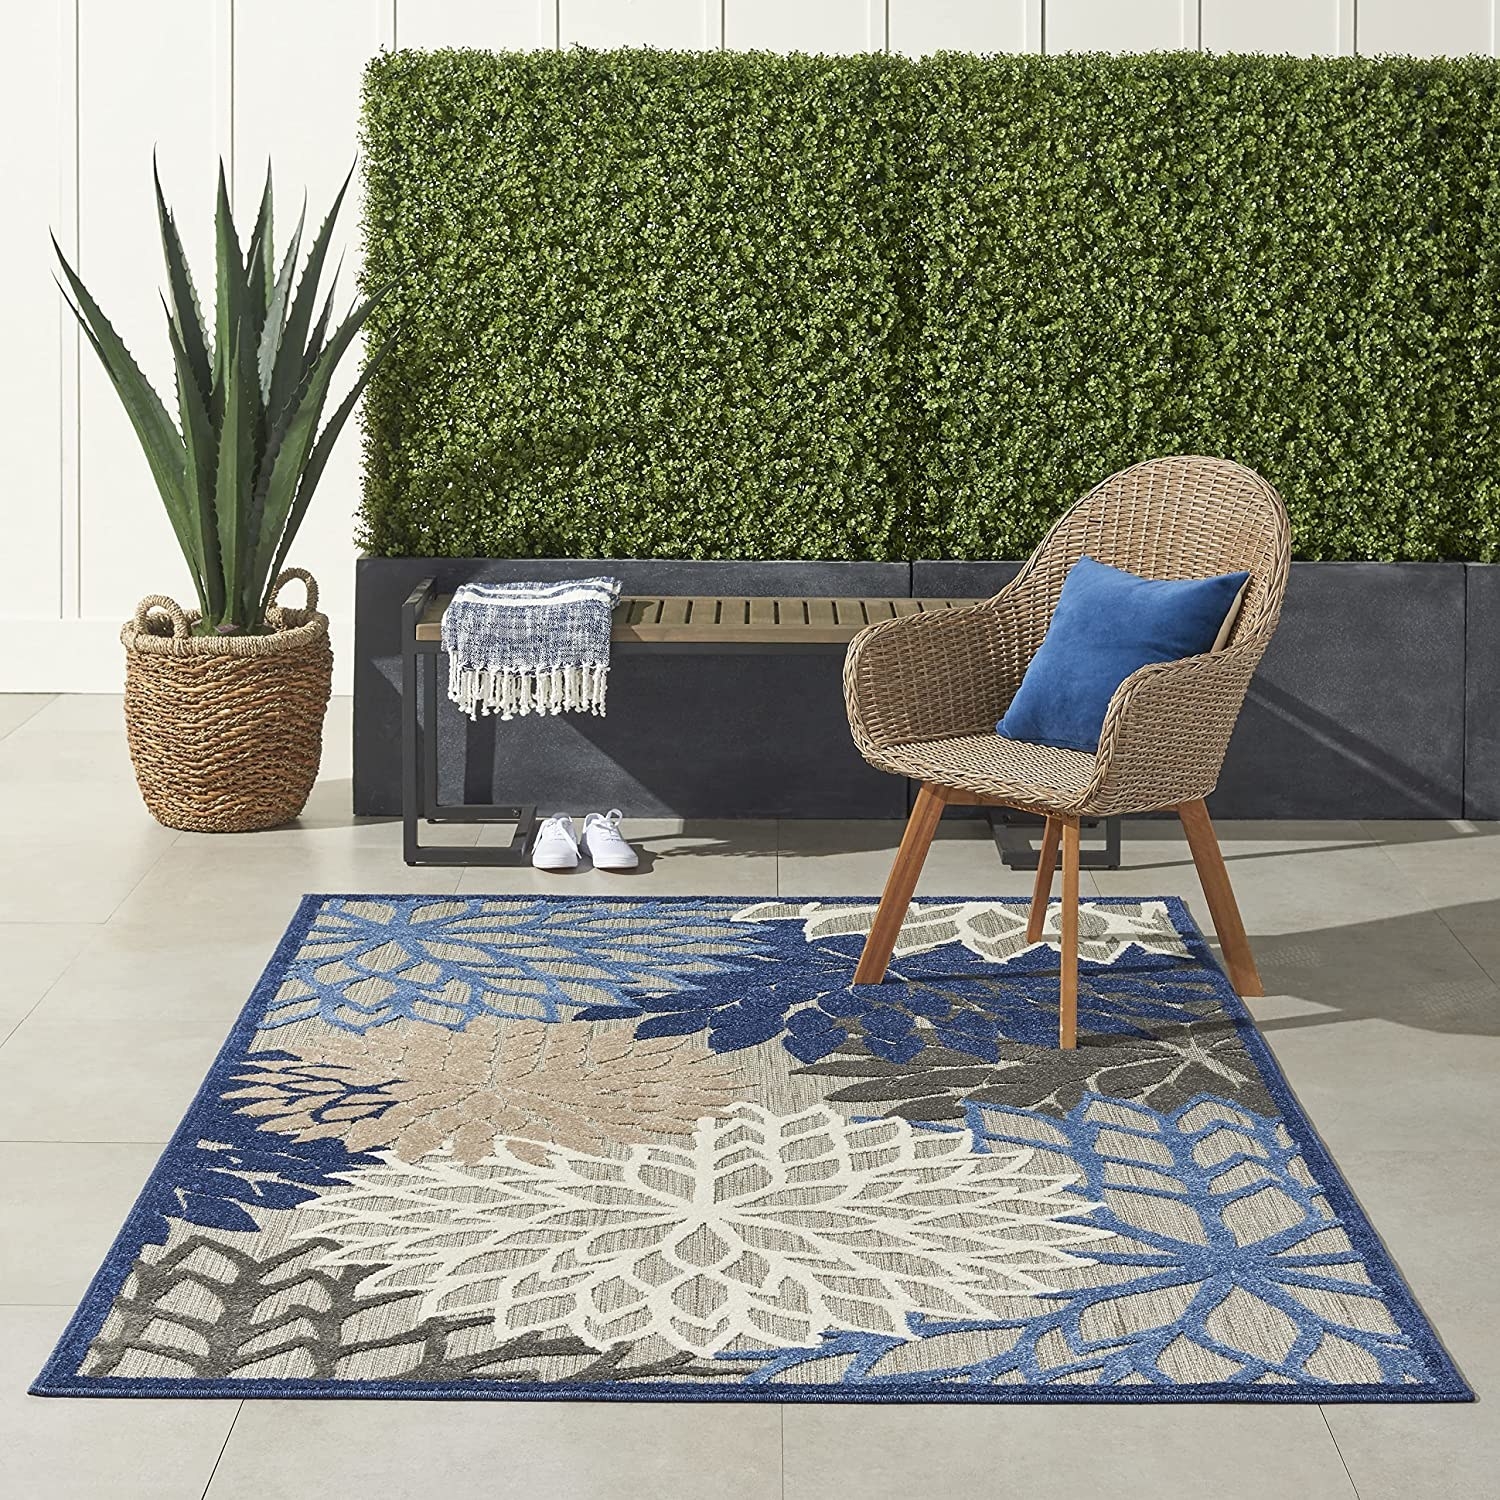 floral rug in shades of blue and gray outside on a patio with furniture